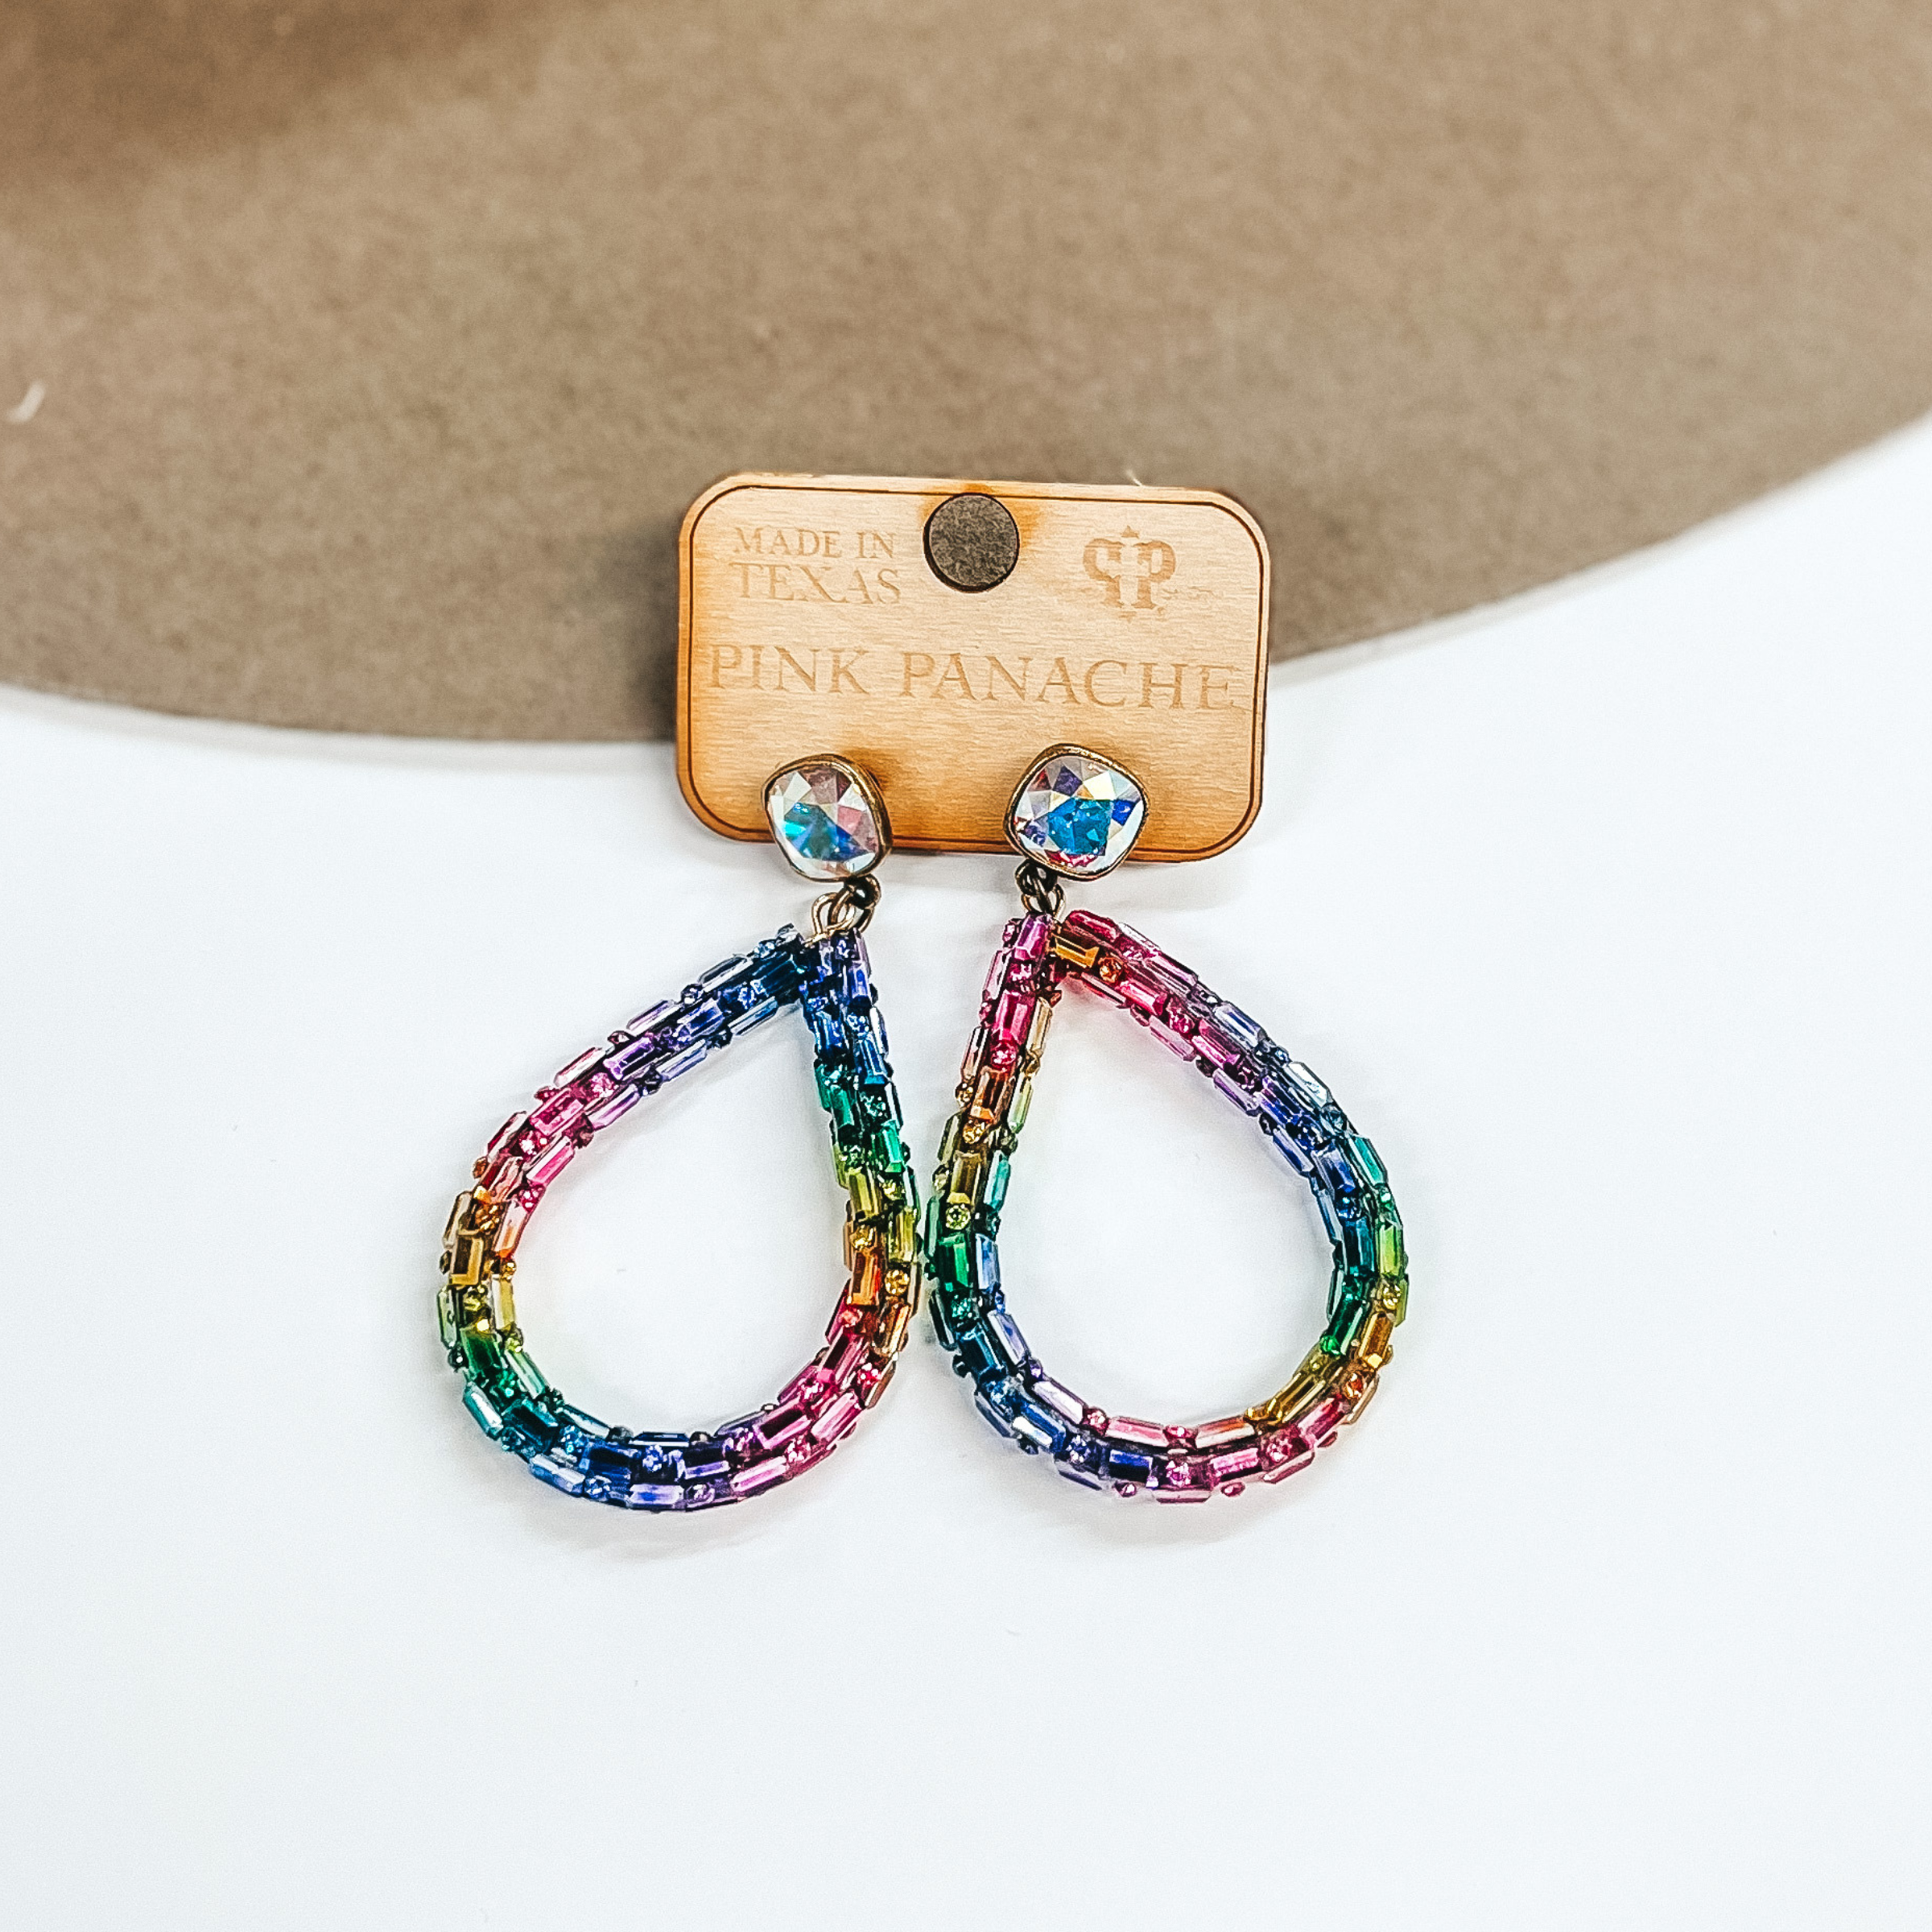 AB cushion cut crystal studs with hanging teardrop dangle. The teardrop dangle has a rainbow of colors. These earrings are pictured on a brown and white background. 